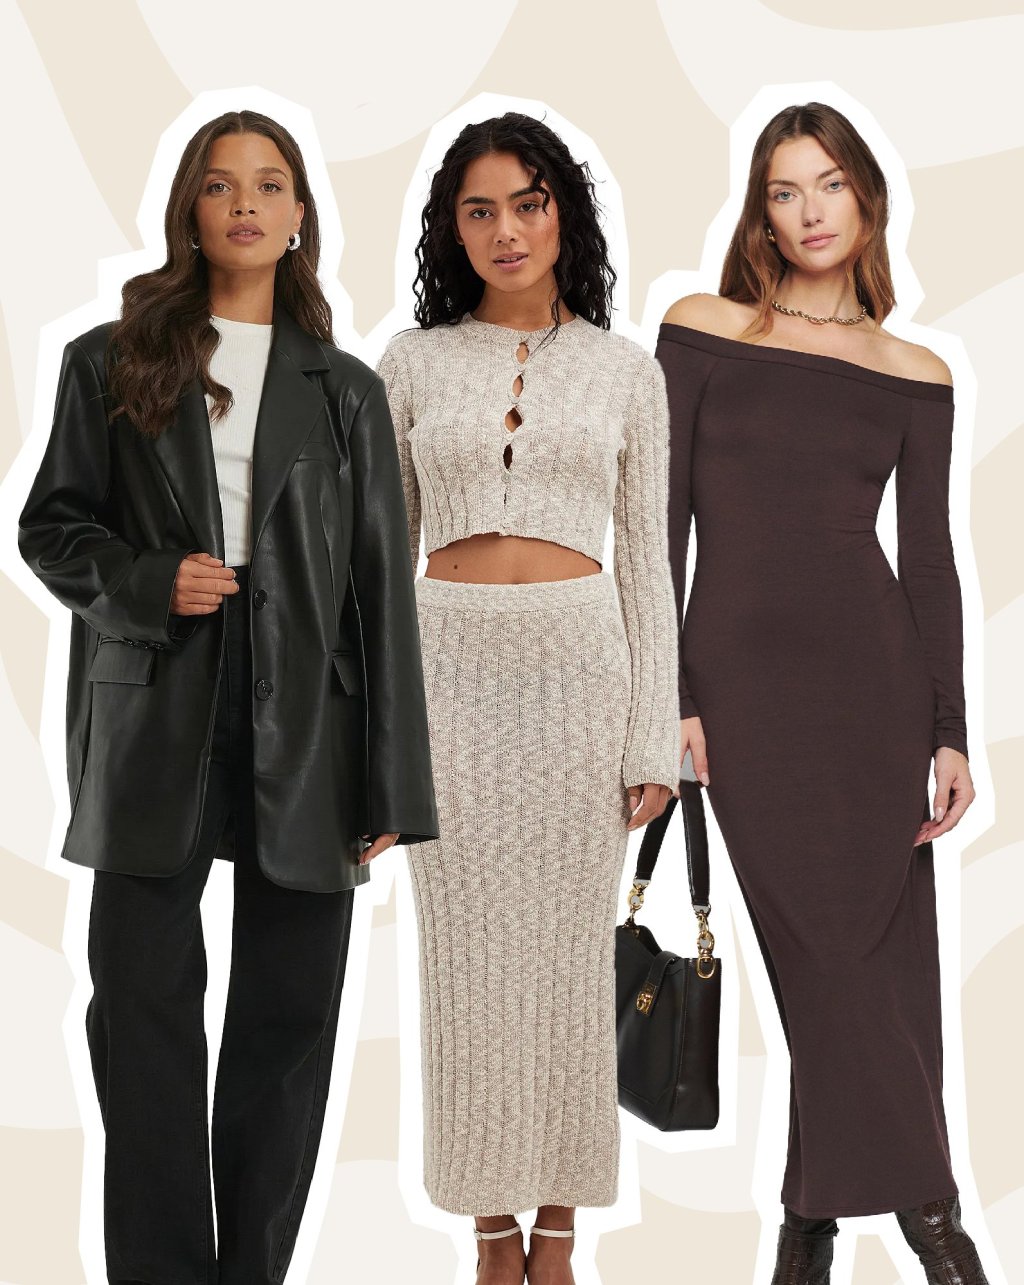 Winter Evening Outfit Ideas to Take on a Night Out in the Cold